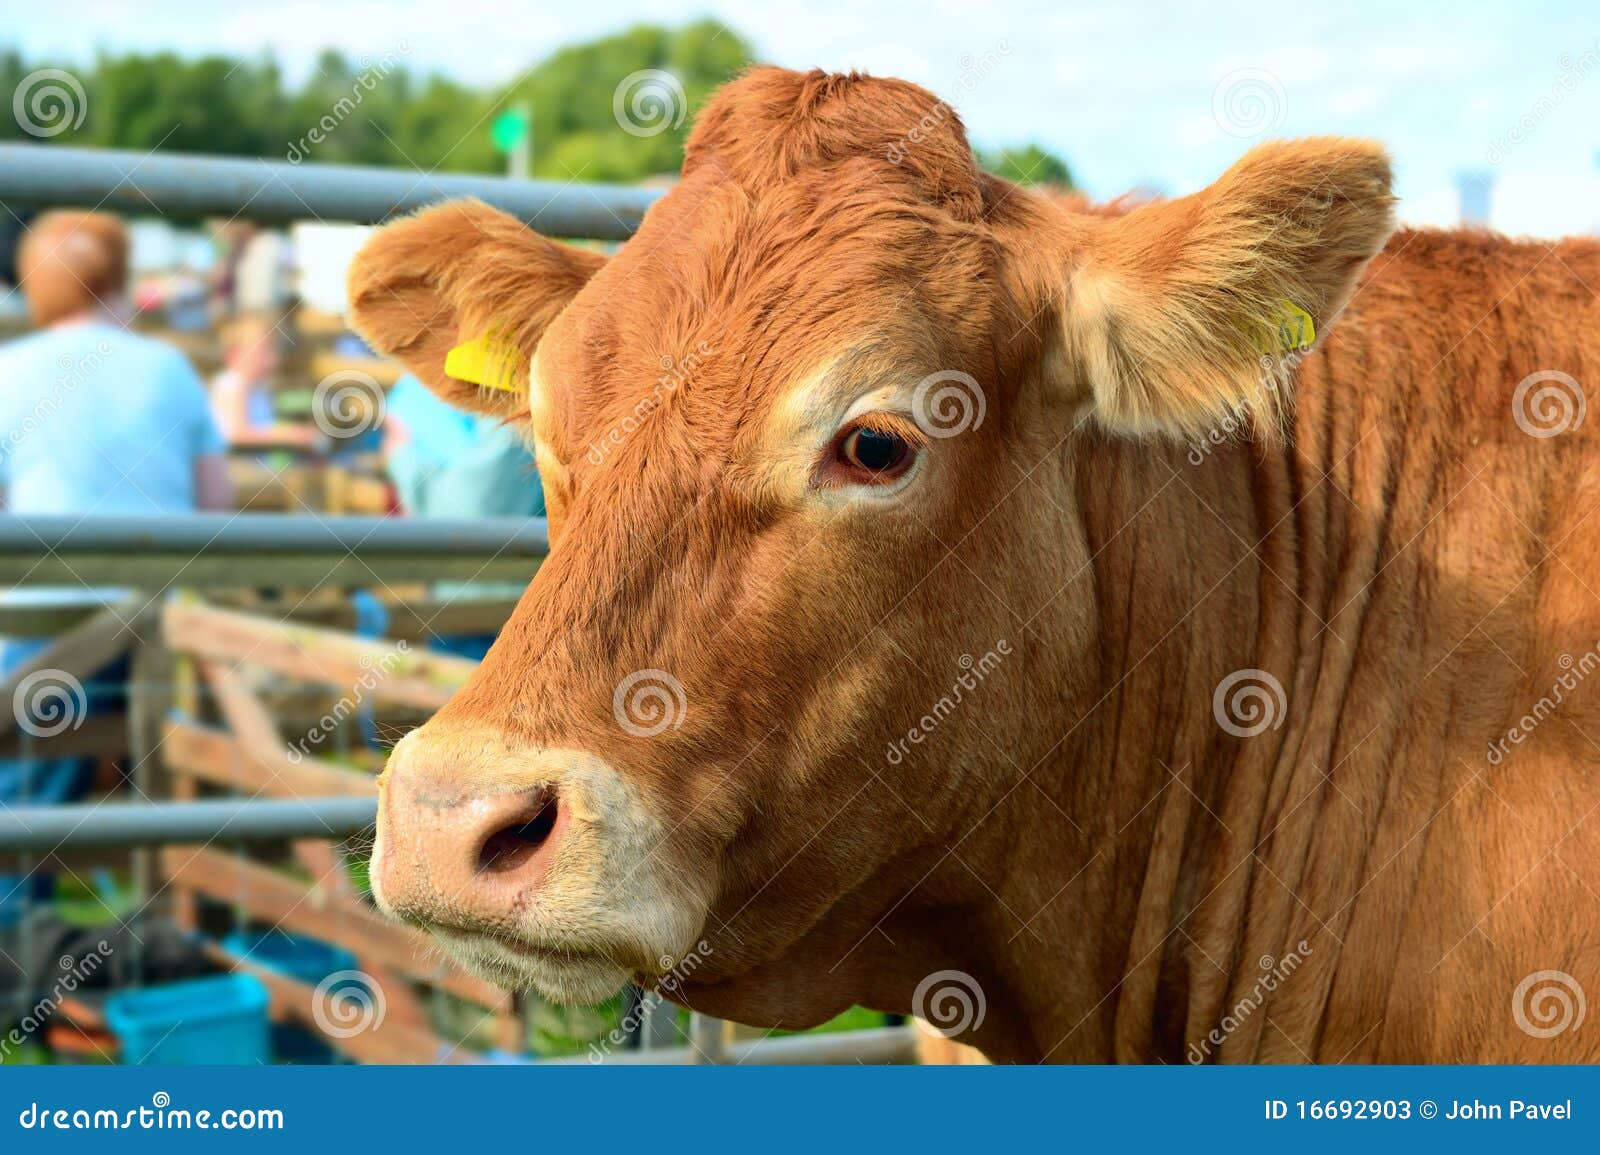 portrait of a brown cow at an agricultural show